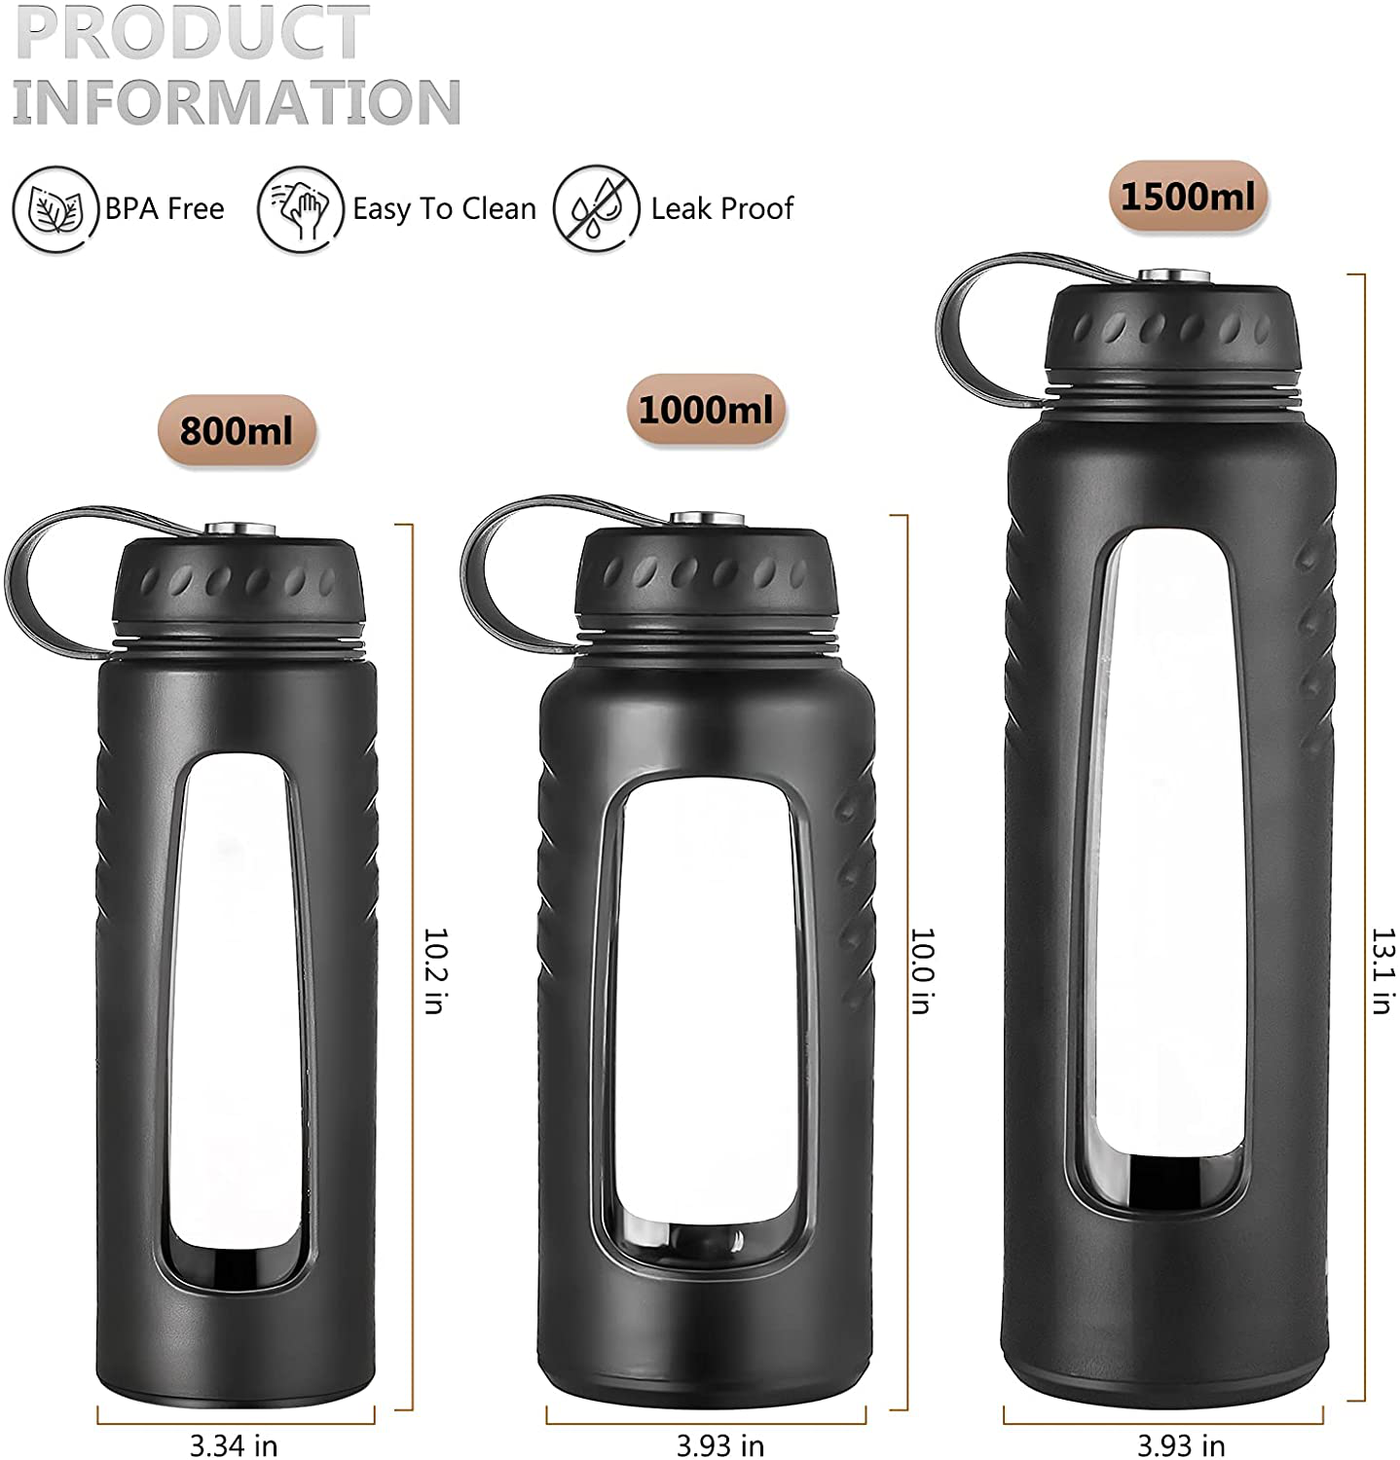 Glass Water Bottle with Infuser - Sport Camping Water Bottle with Insulated Sleeve, ZDZDZ 1000ML/33oz Glass Tea Infuser Travel Tumbler Wide Mouth